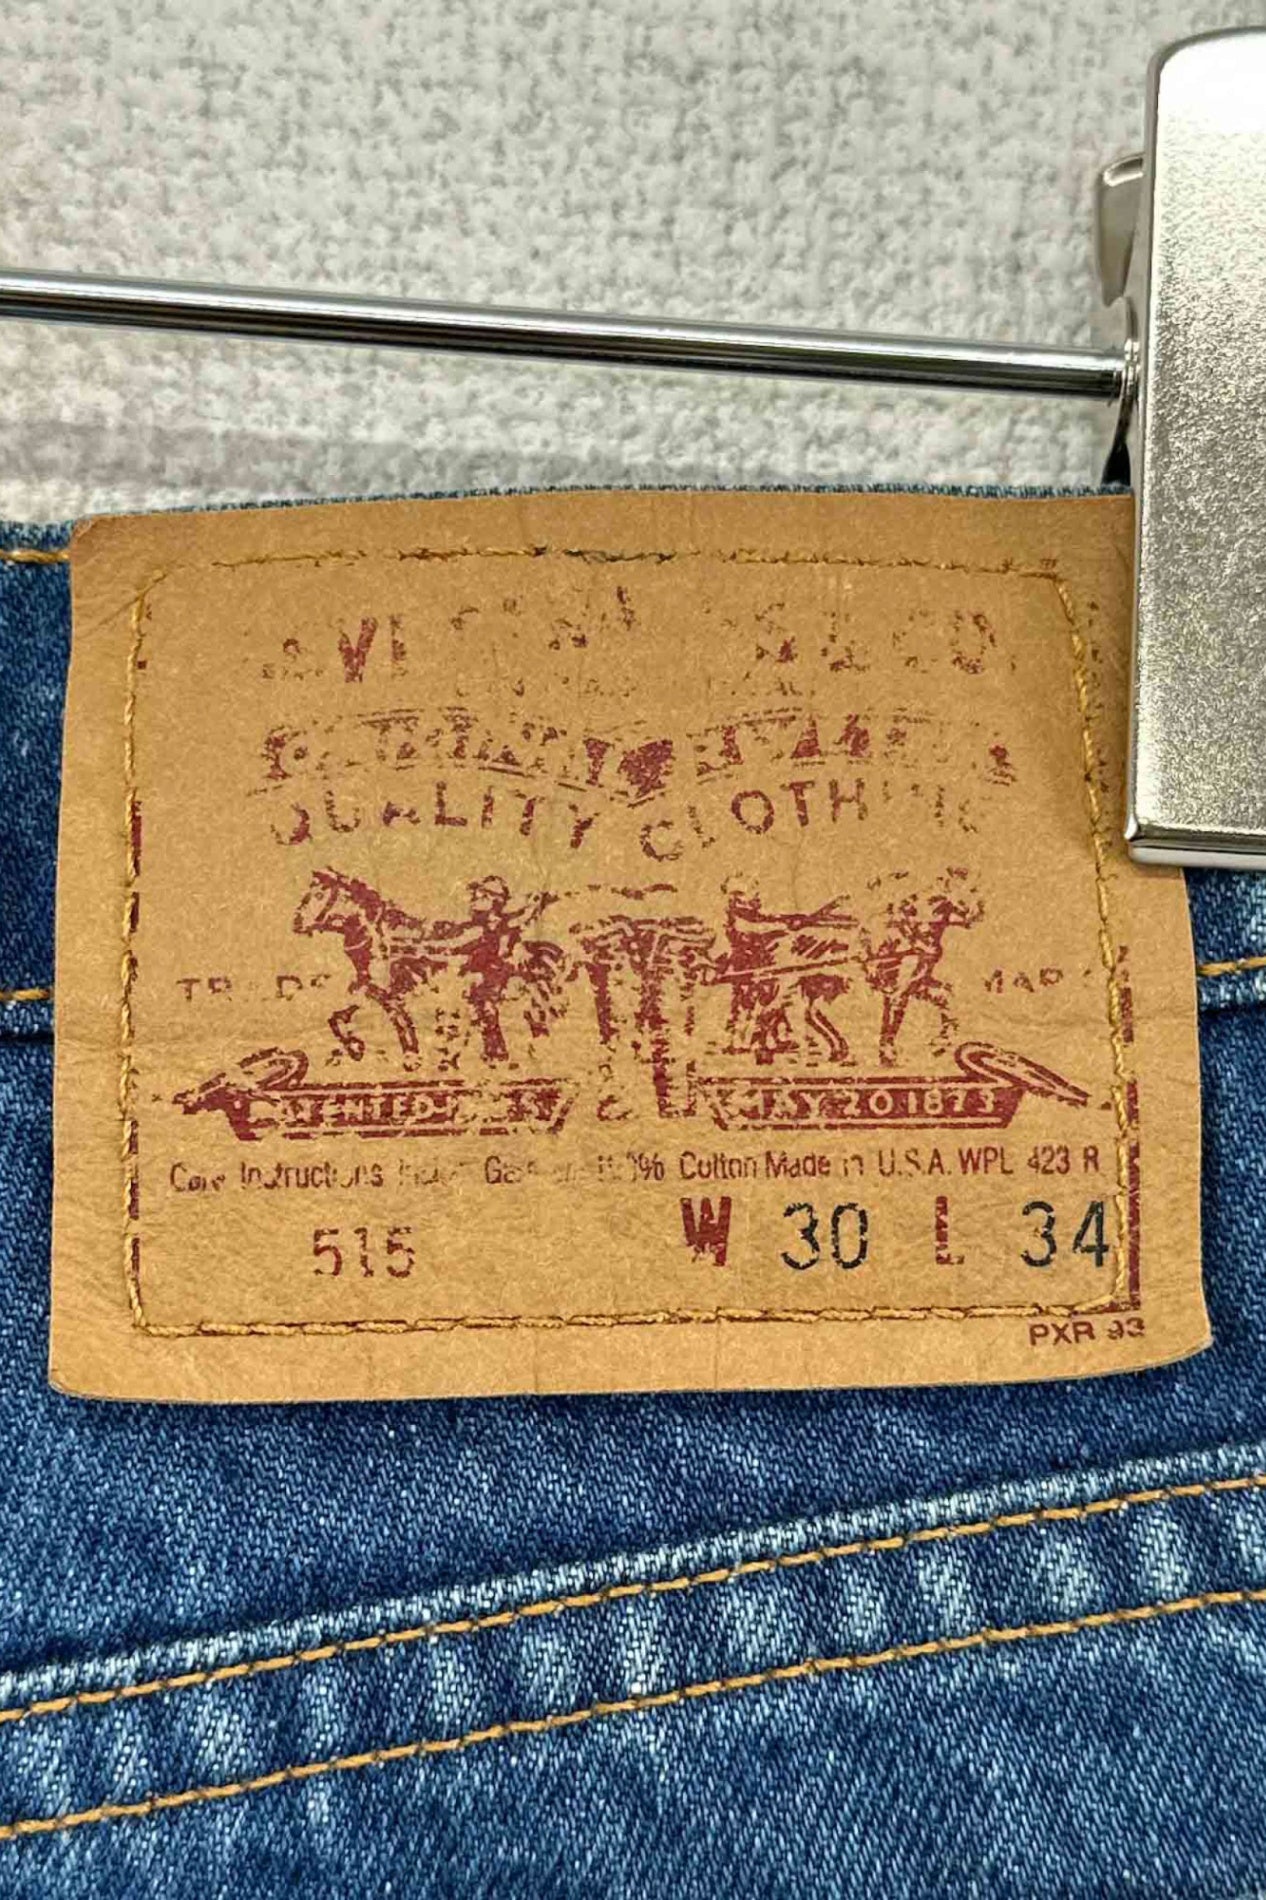 90's Made in USA Levi's 515 denim pants